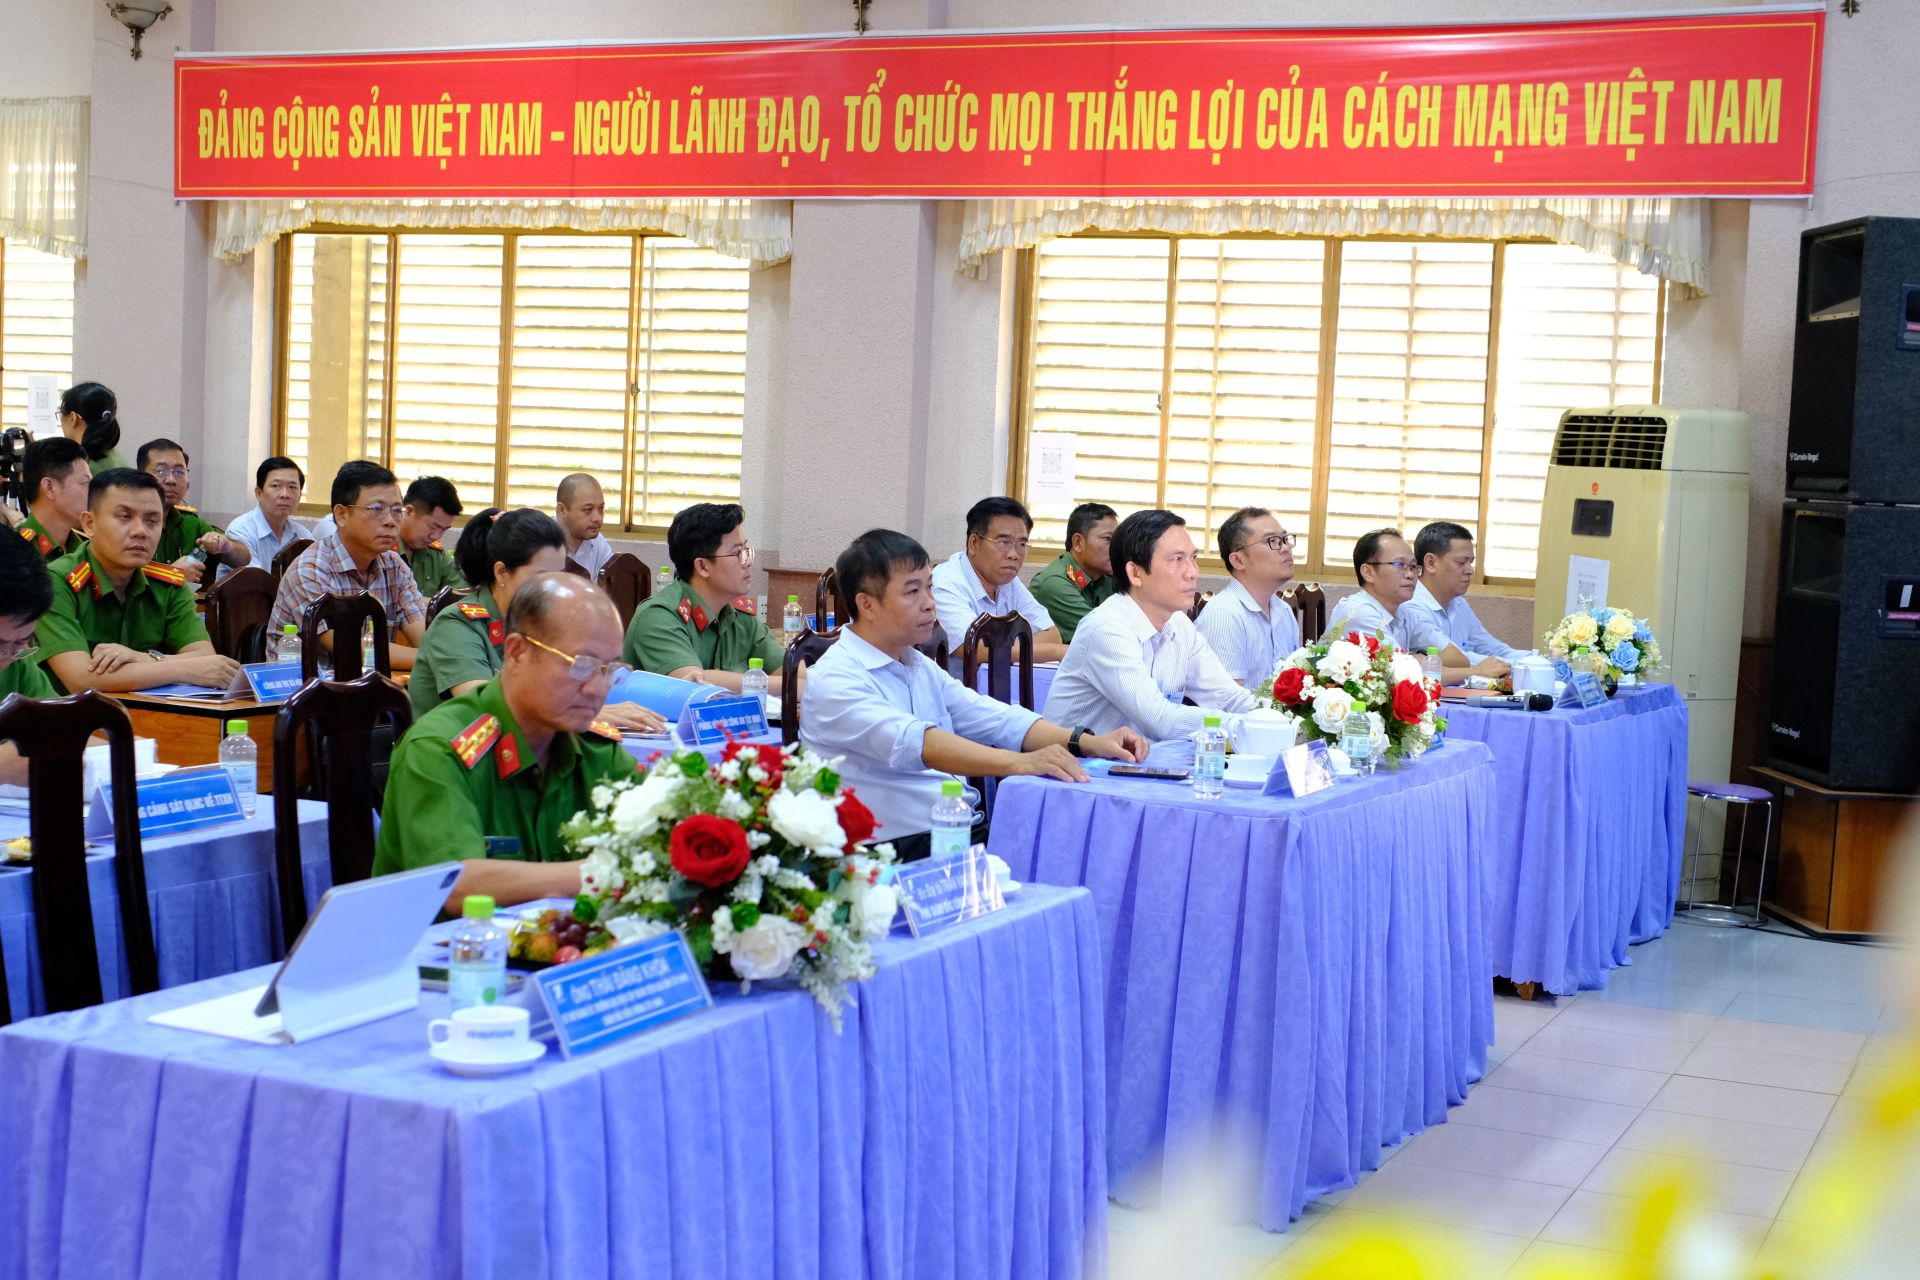 Tay Ninh Police and VNPT Tay Ninh materialize the agreement on digital transformation cooperation